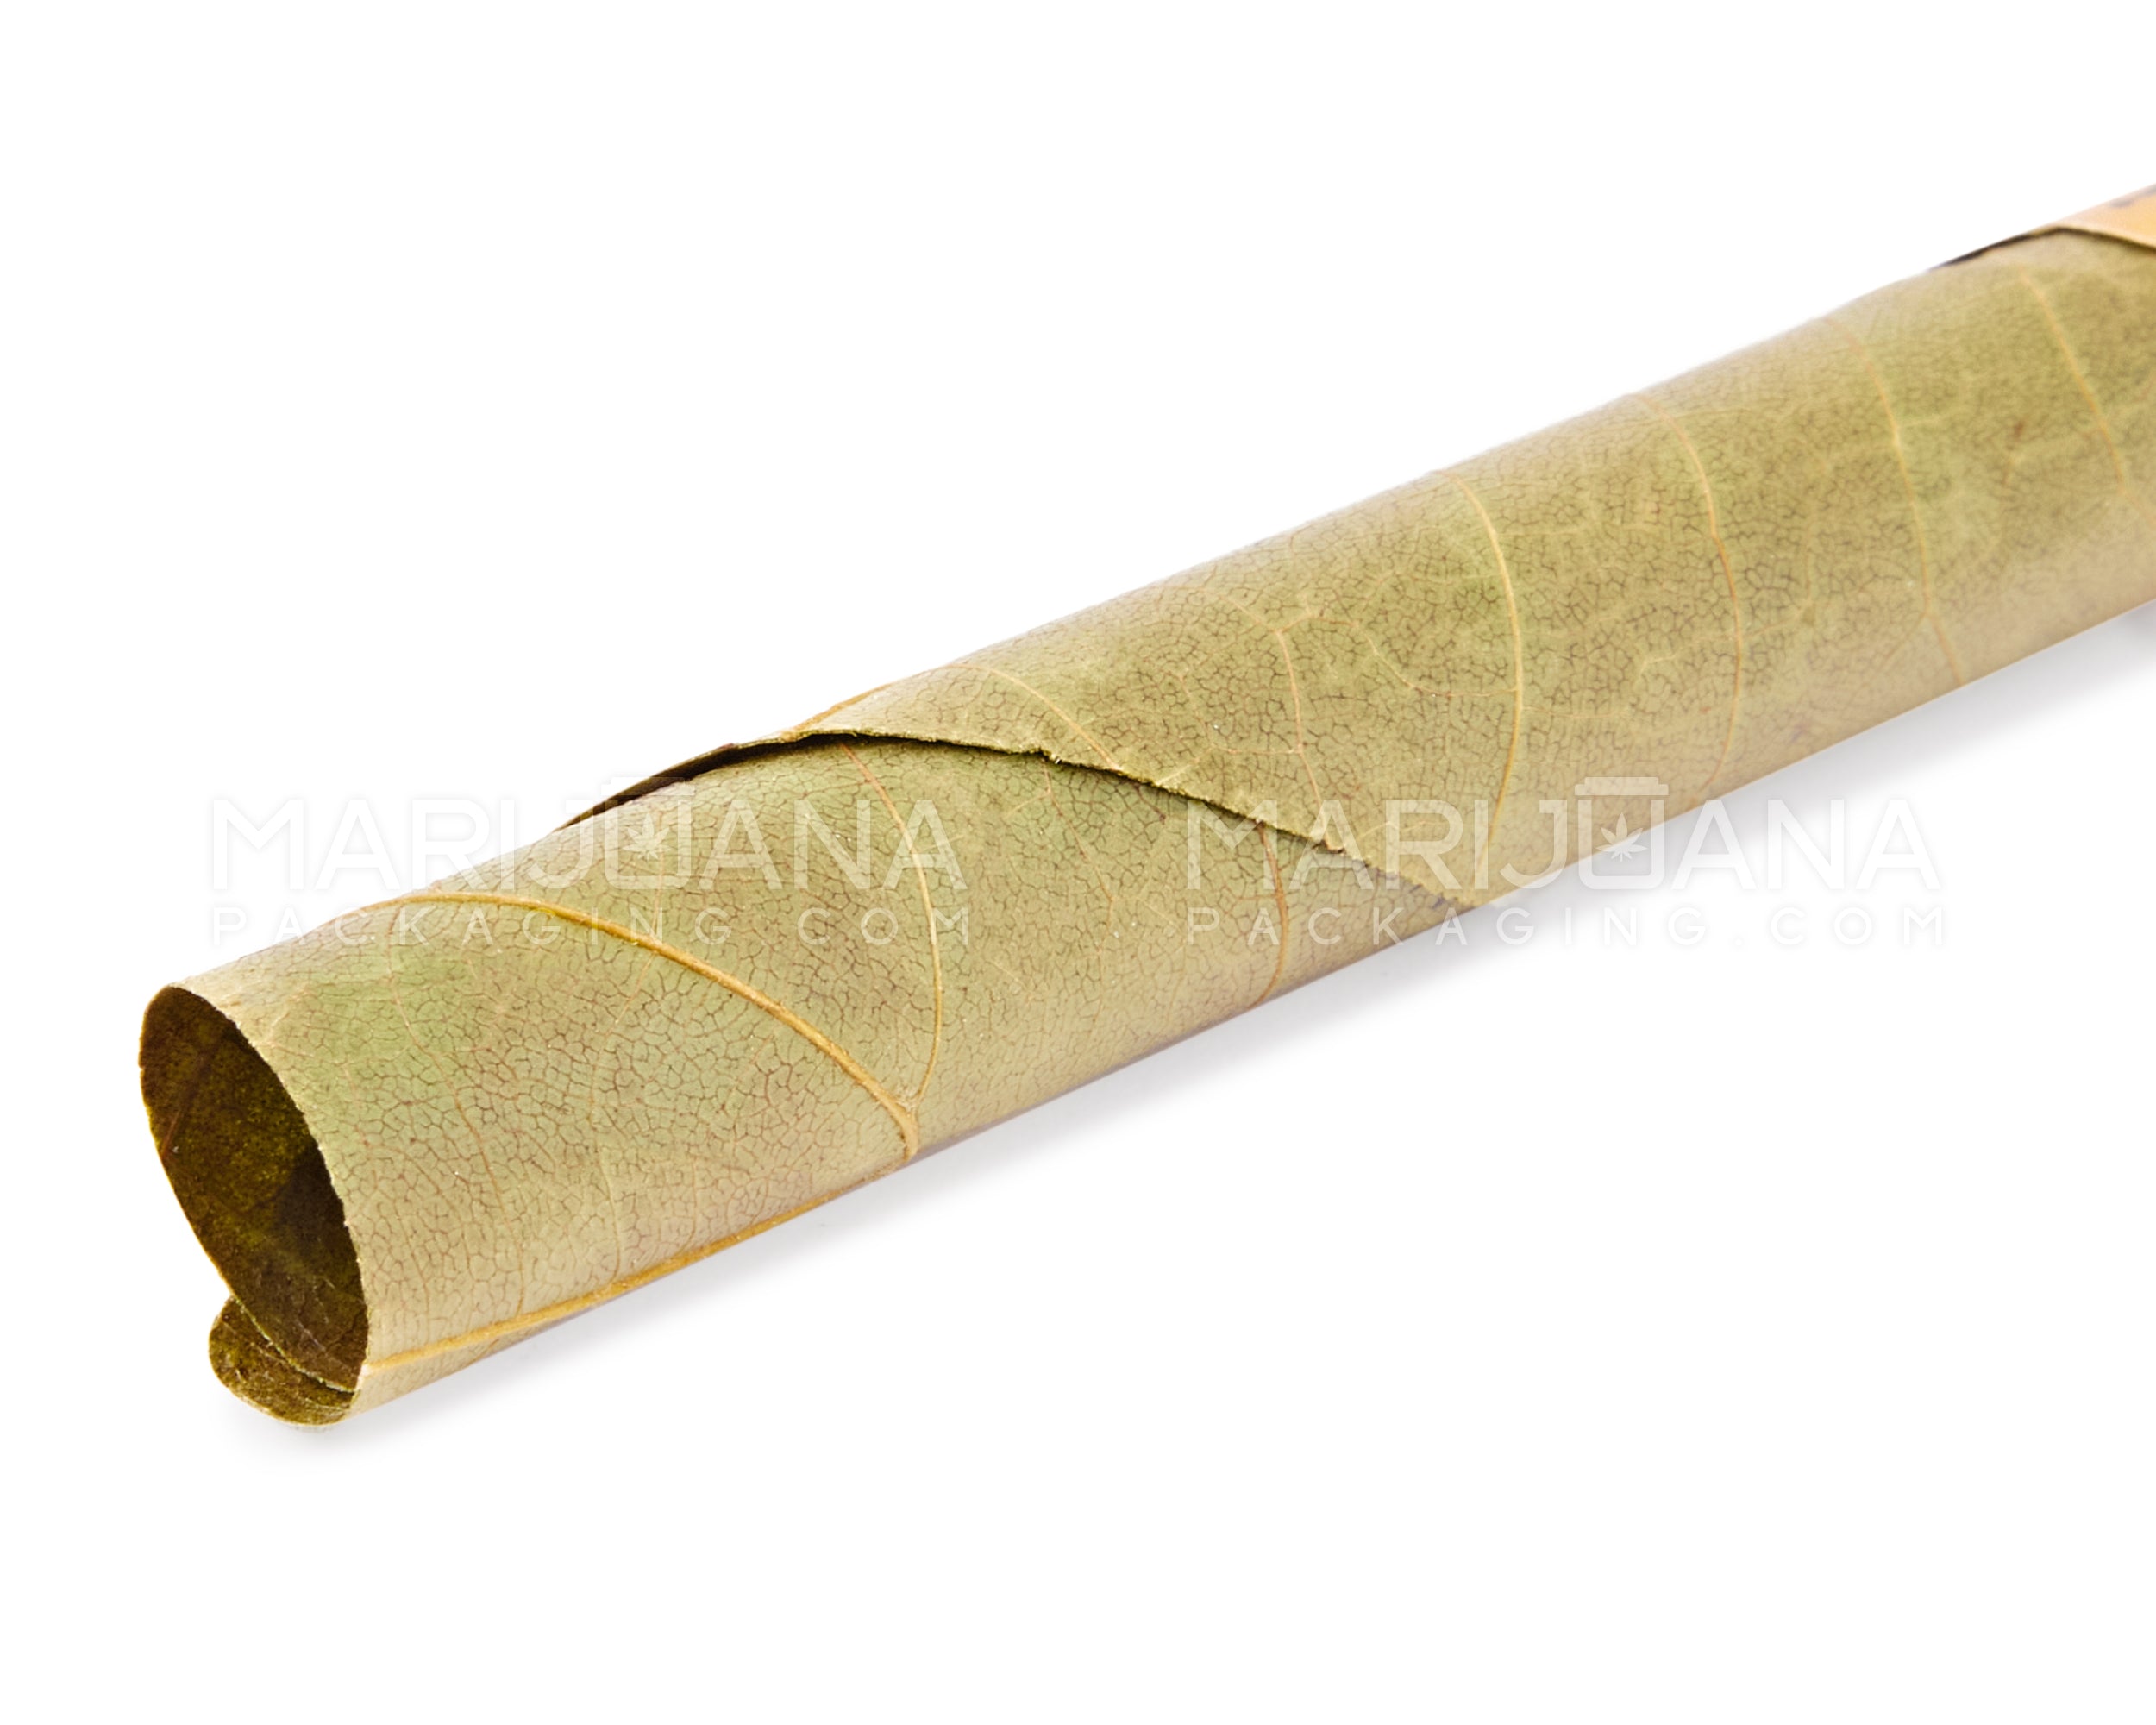 KING PALM | 'Retail Display' Mini Green Natural Leaf Blunt Wraps | 84mm - Pine Drip - 15 Count - 7